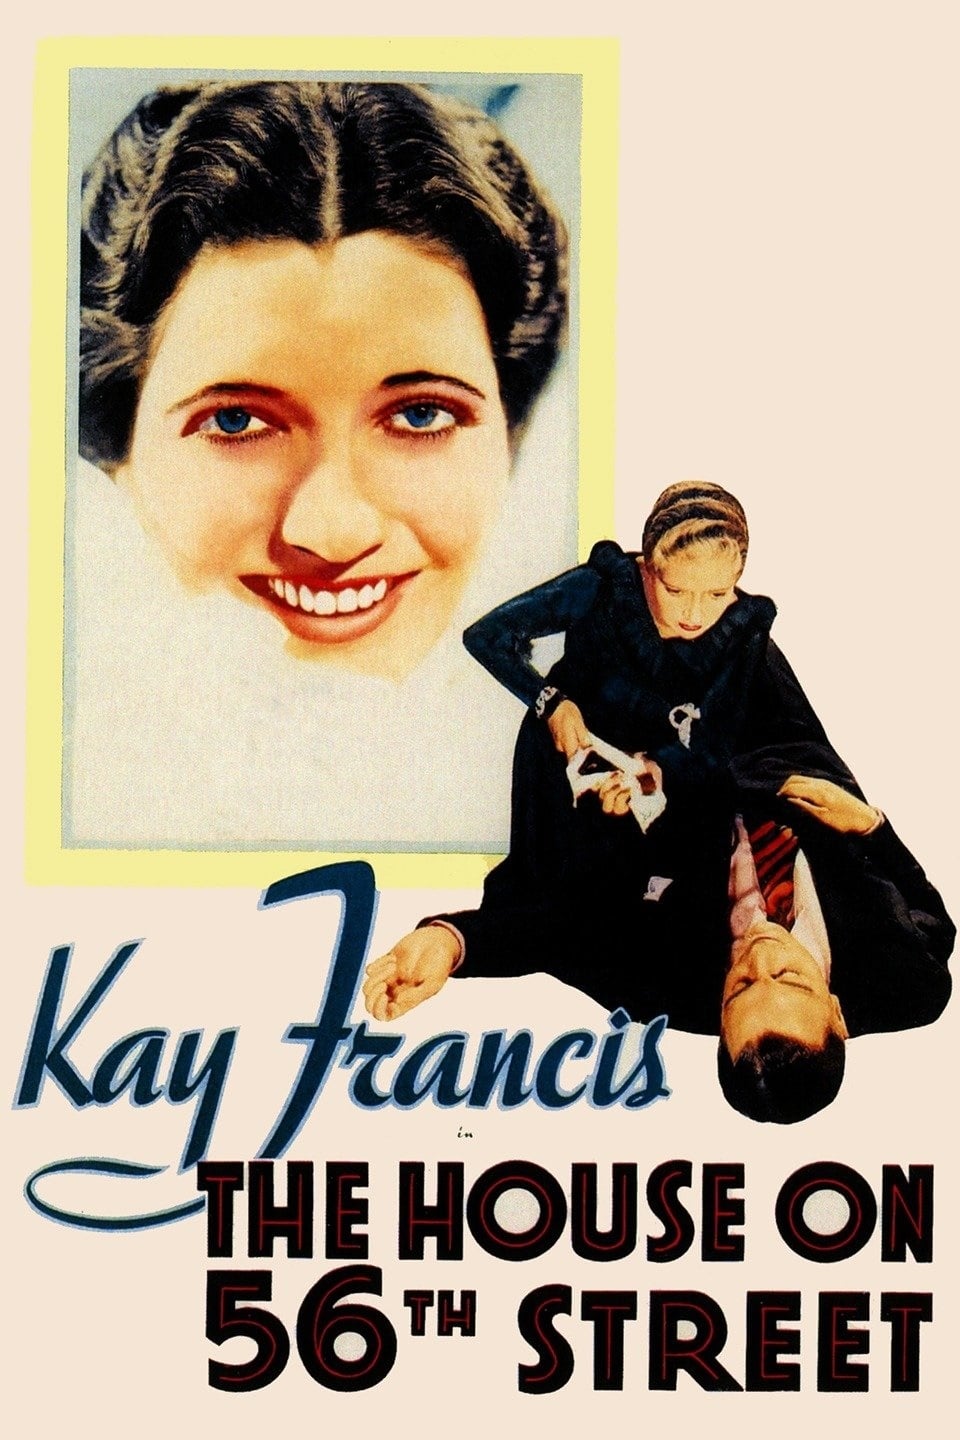 The House on 56th Street (1933)